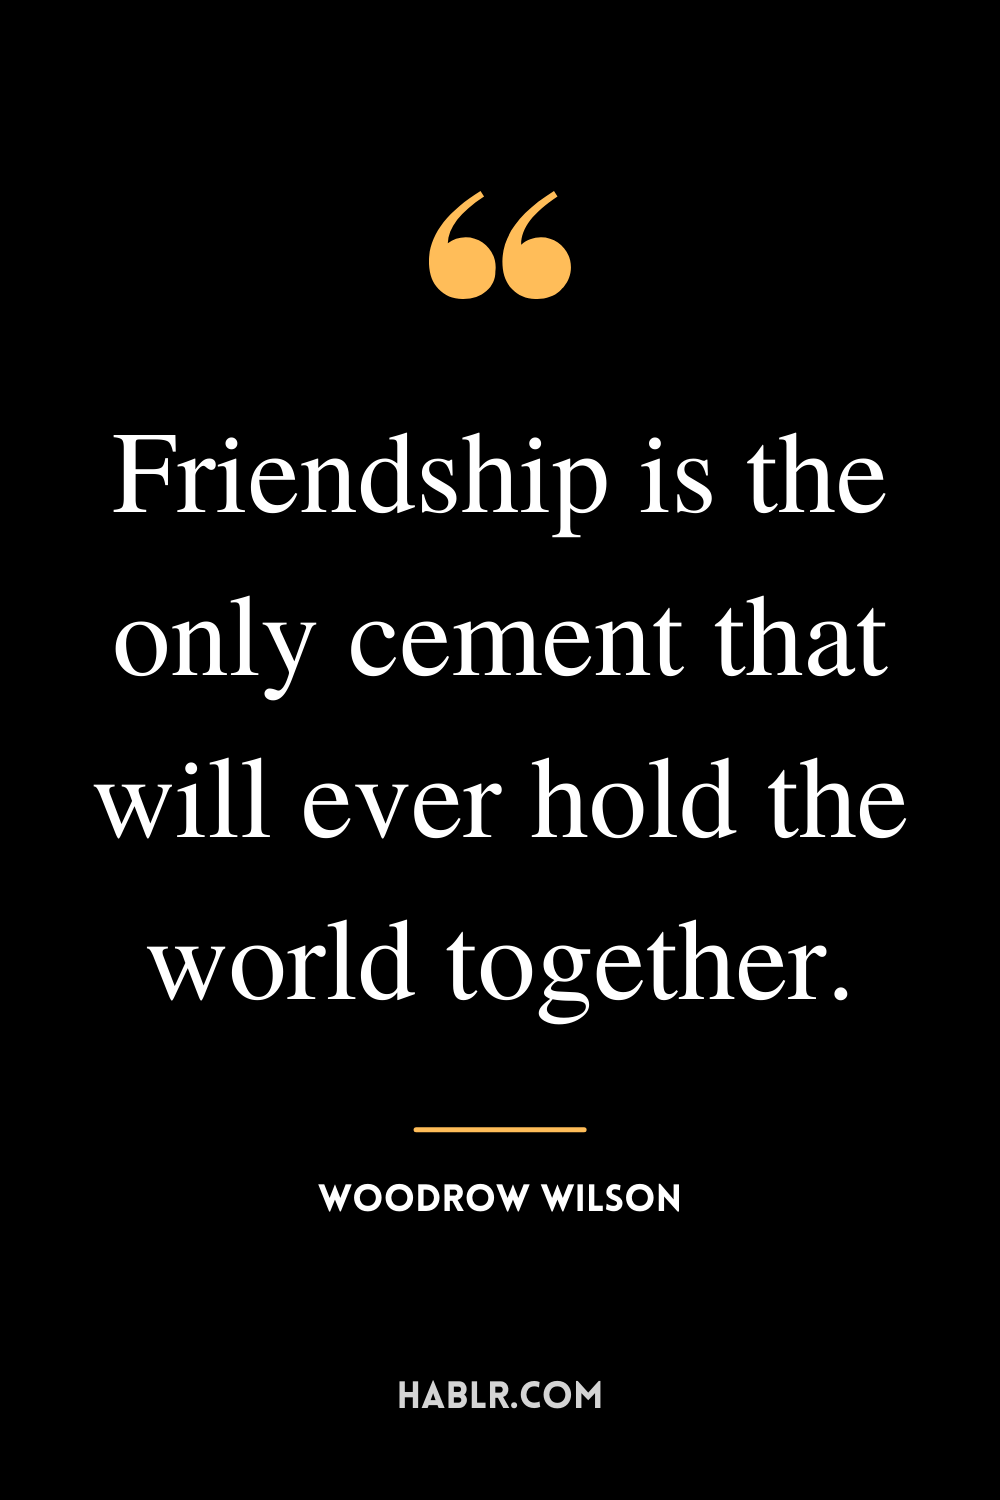 “Friendship is the only cement that will ever hold the world together.” -Woodrow Wilson